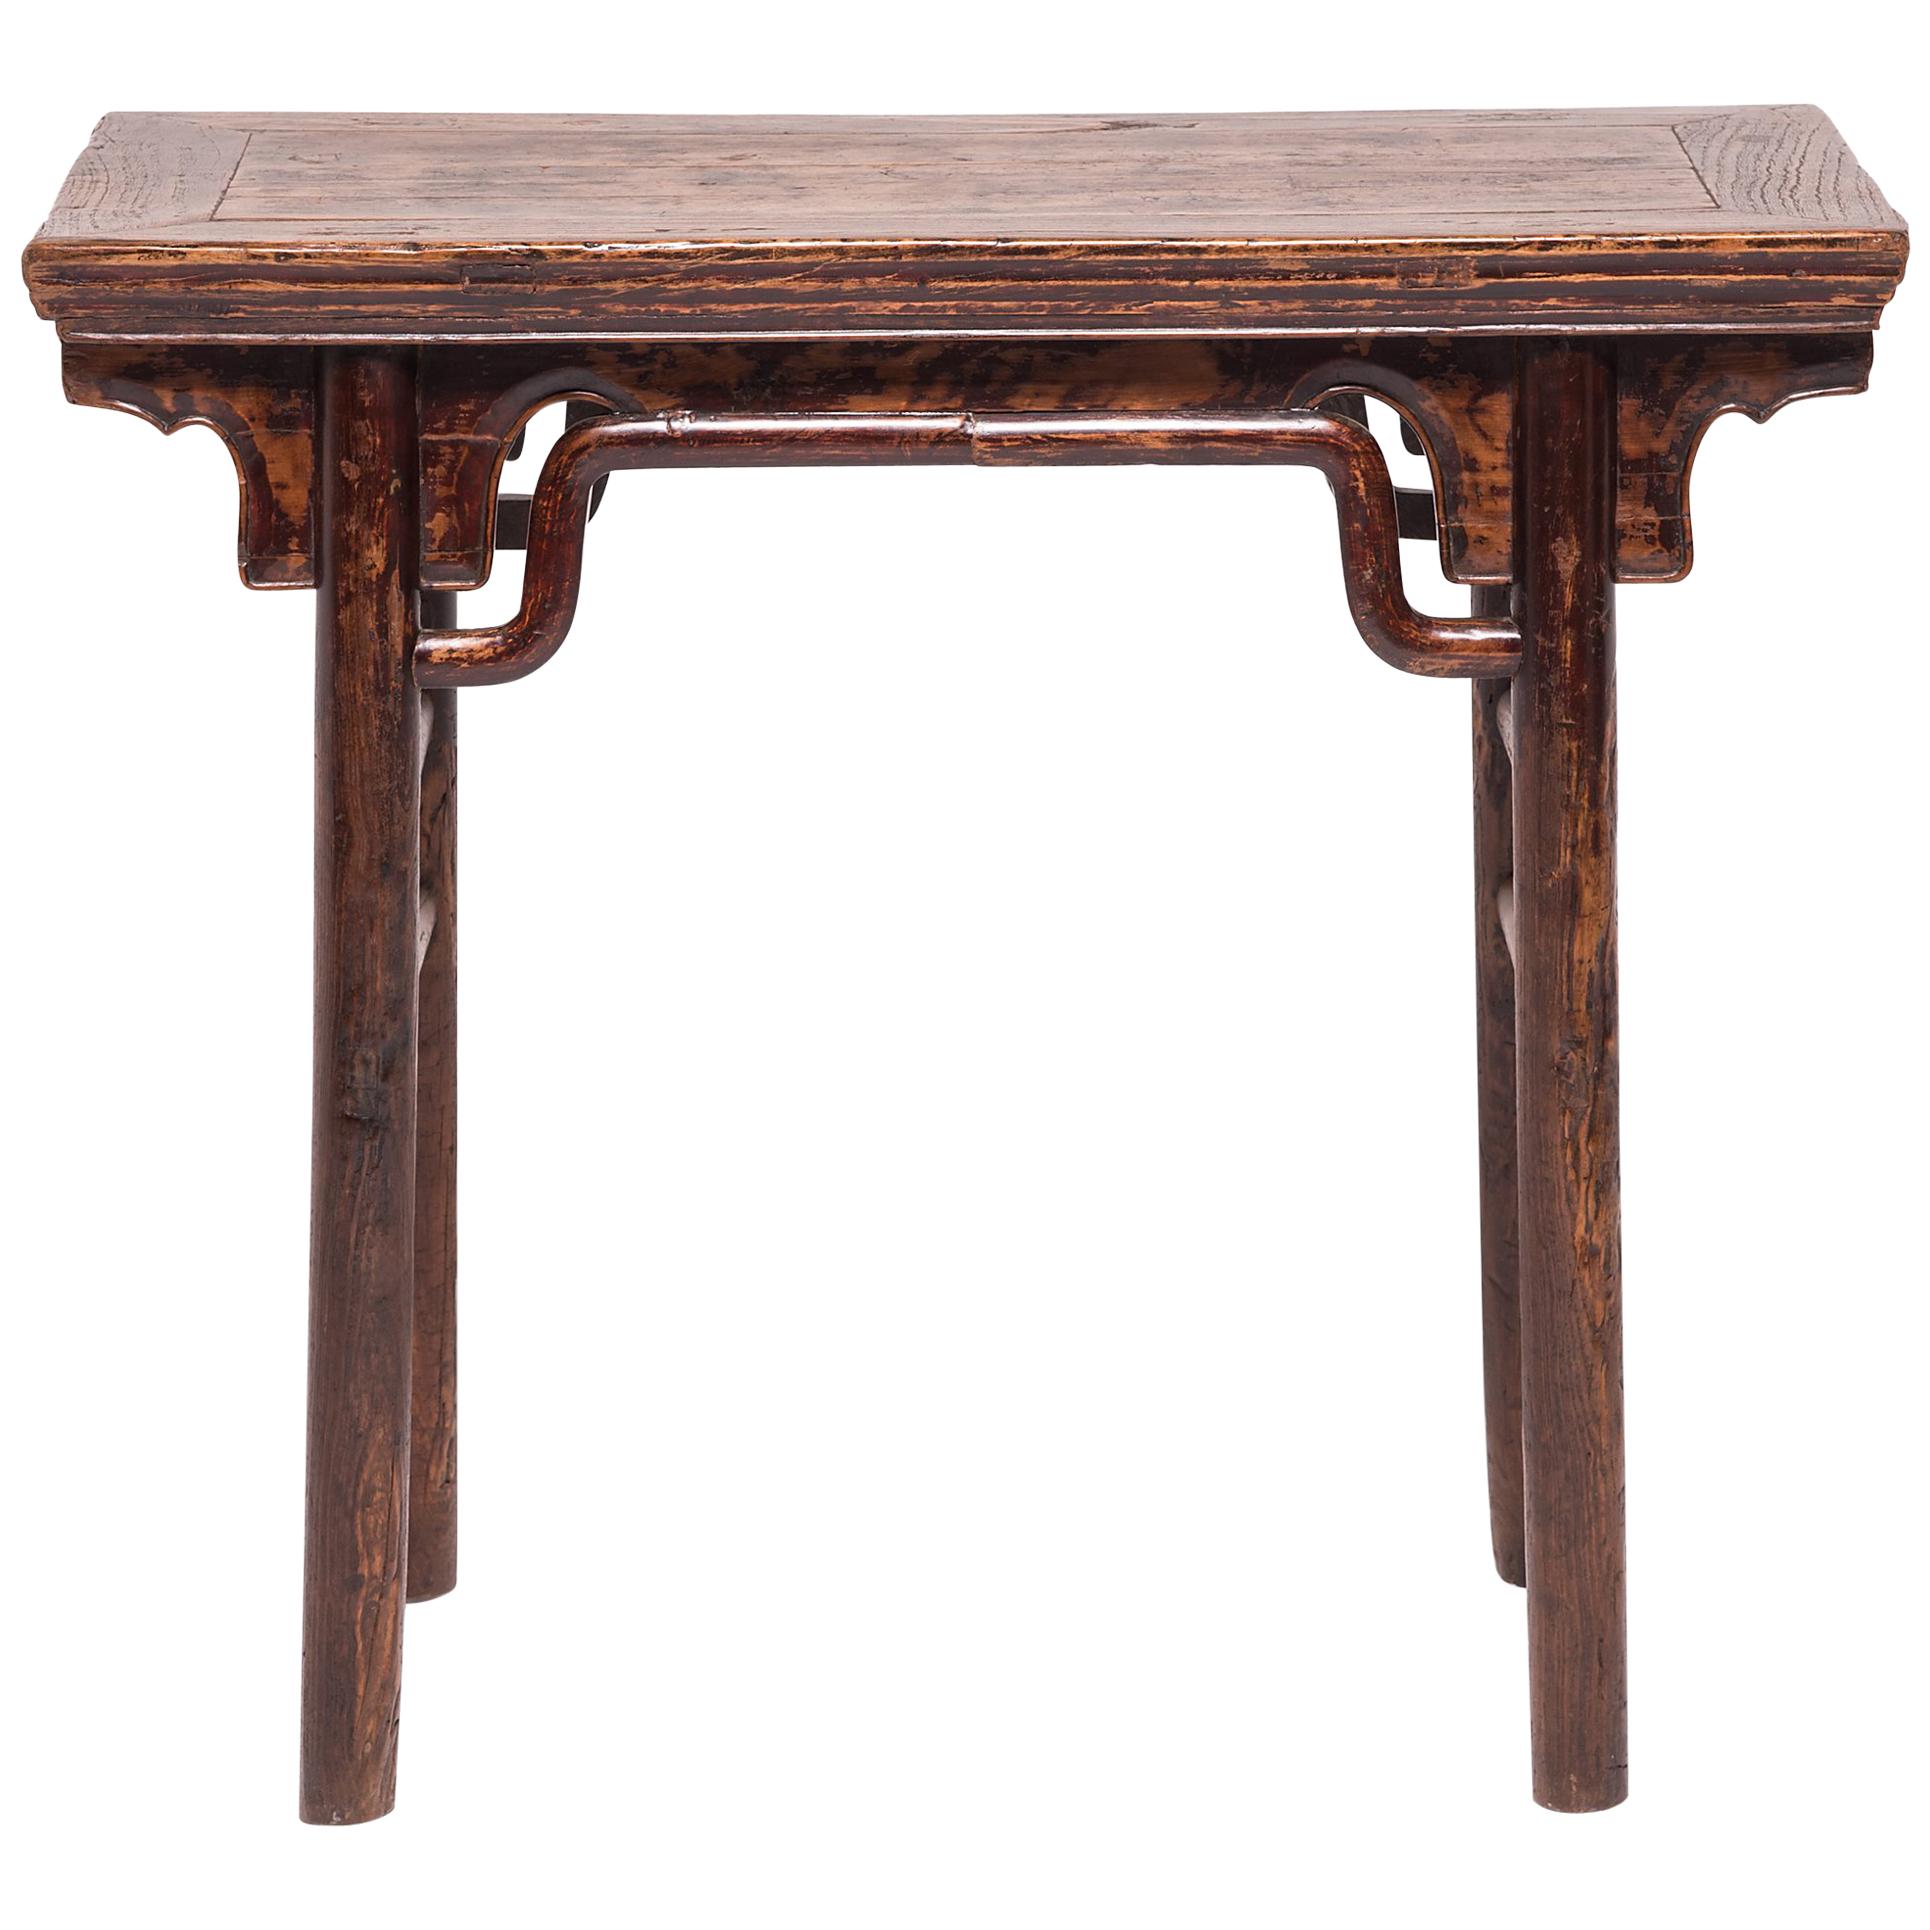 19th Century Chinese Wine Table with Humpback Stretchers